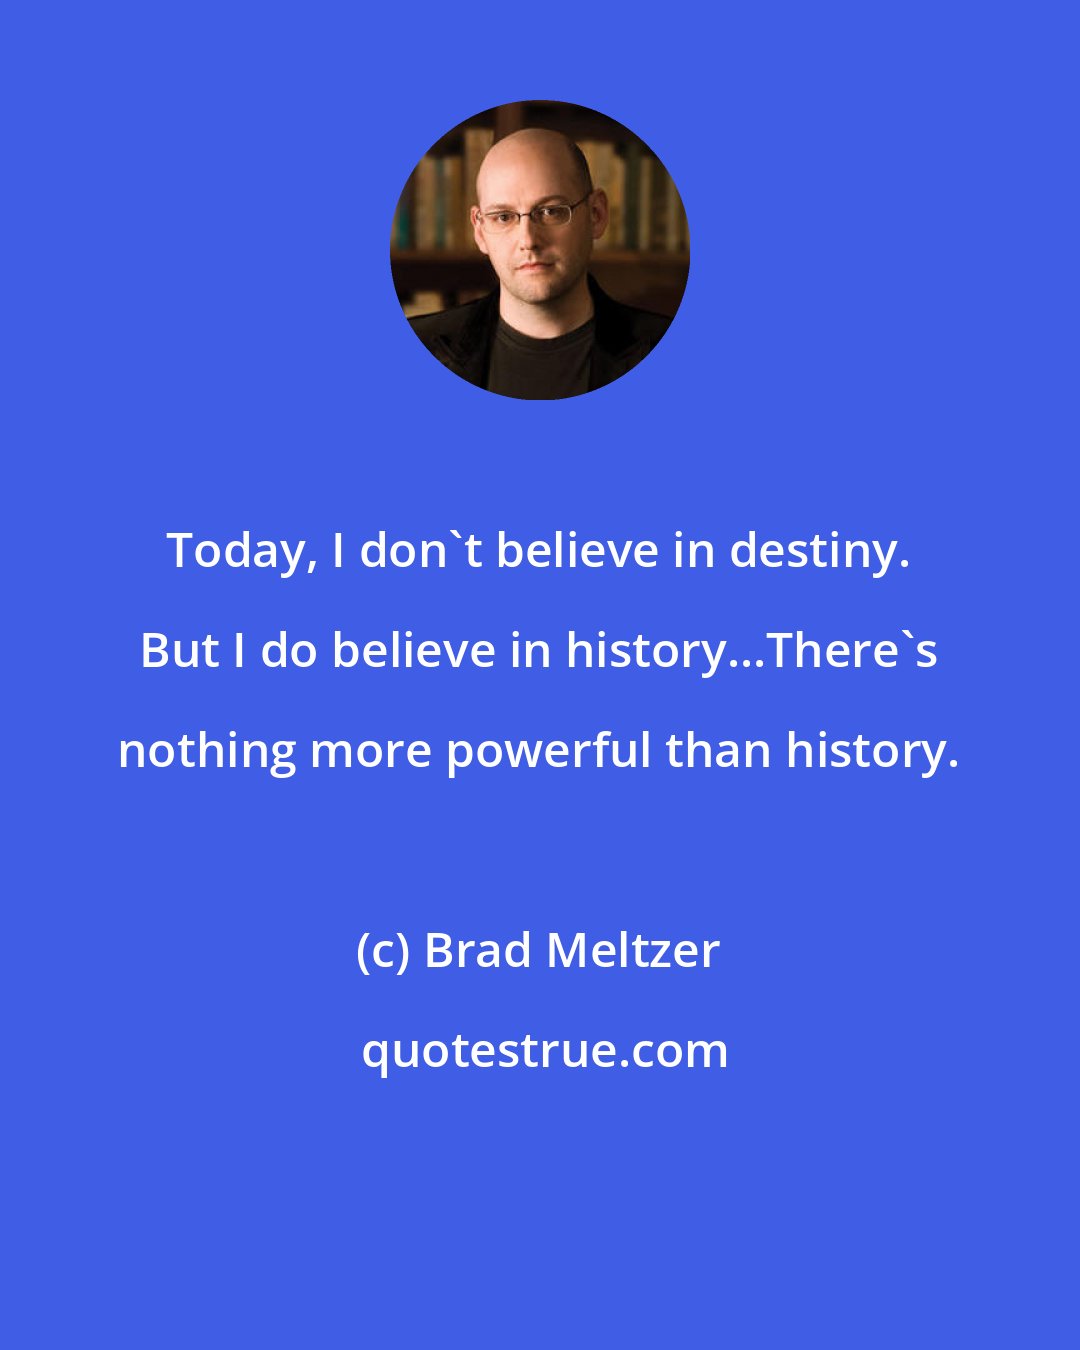 Brad Meltzer: Today, I don't believe in destiny. But I do believe in history...There's nothing more powerful than history.